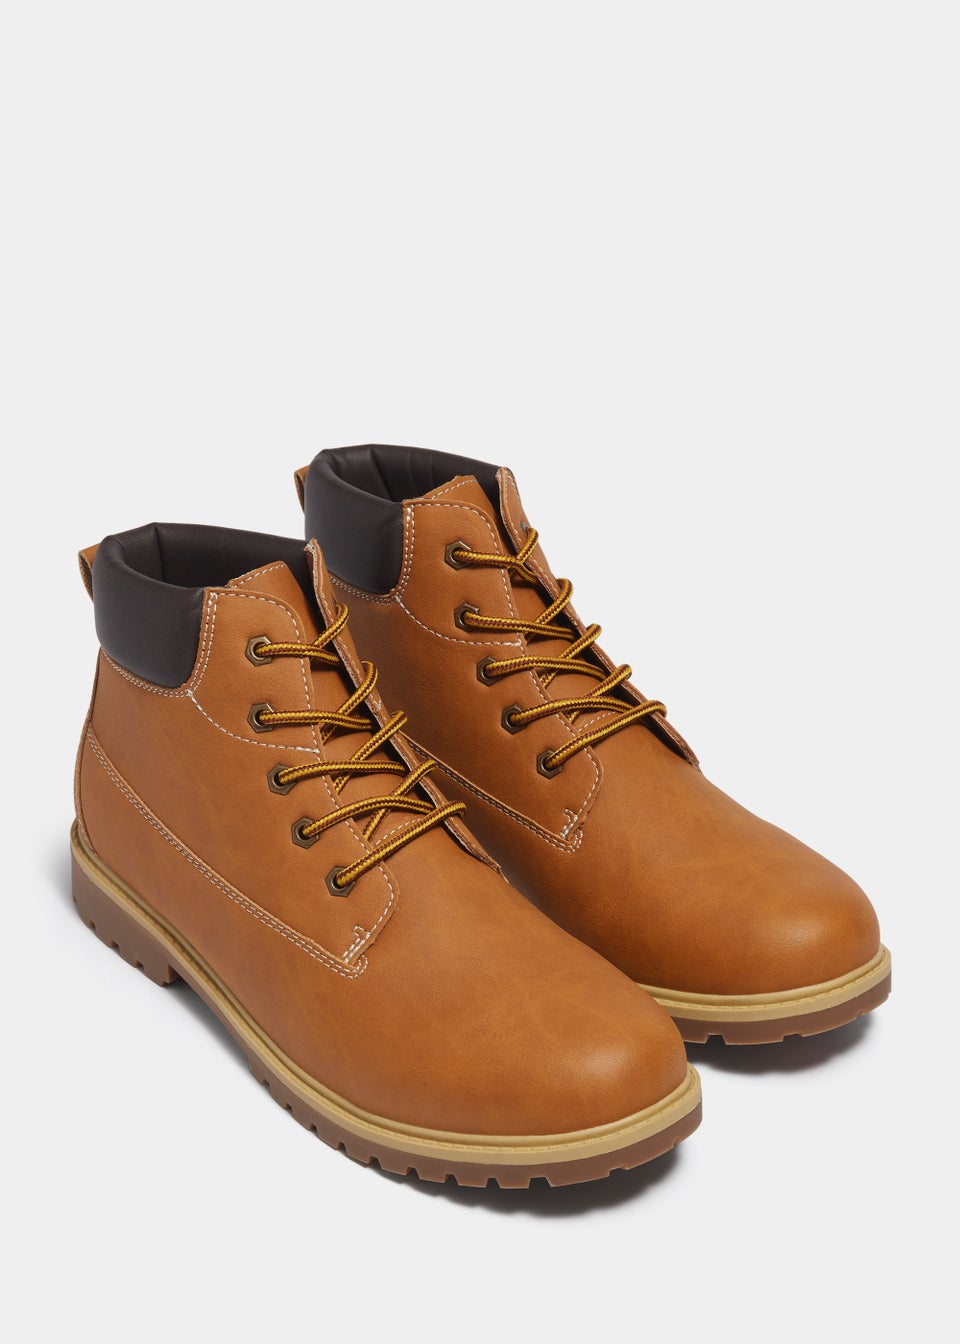 Sand Worker Boots